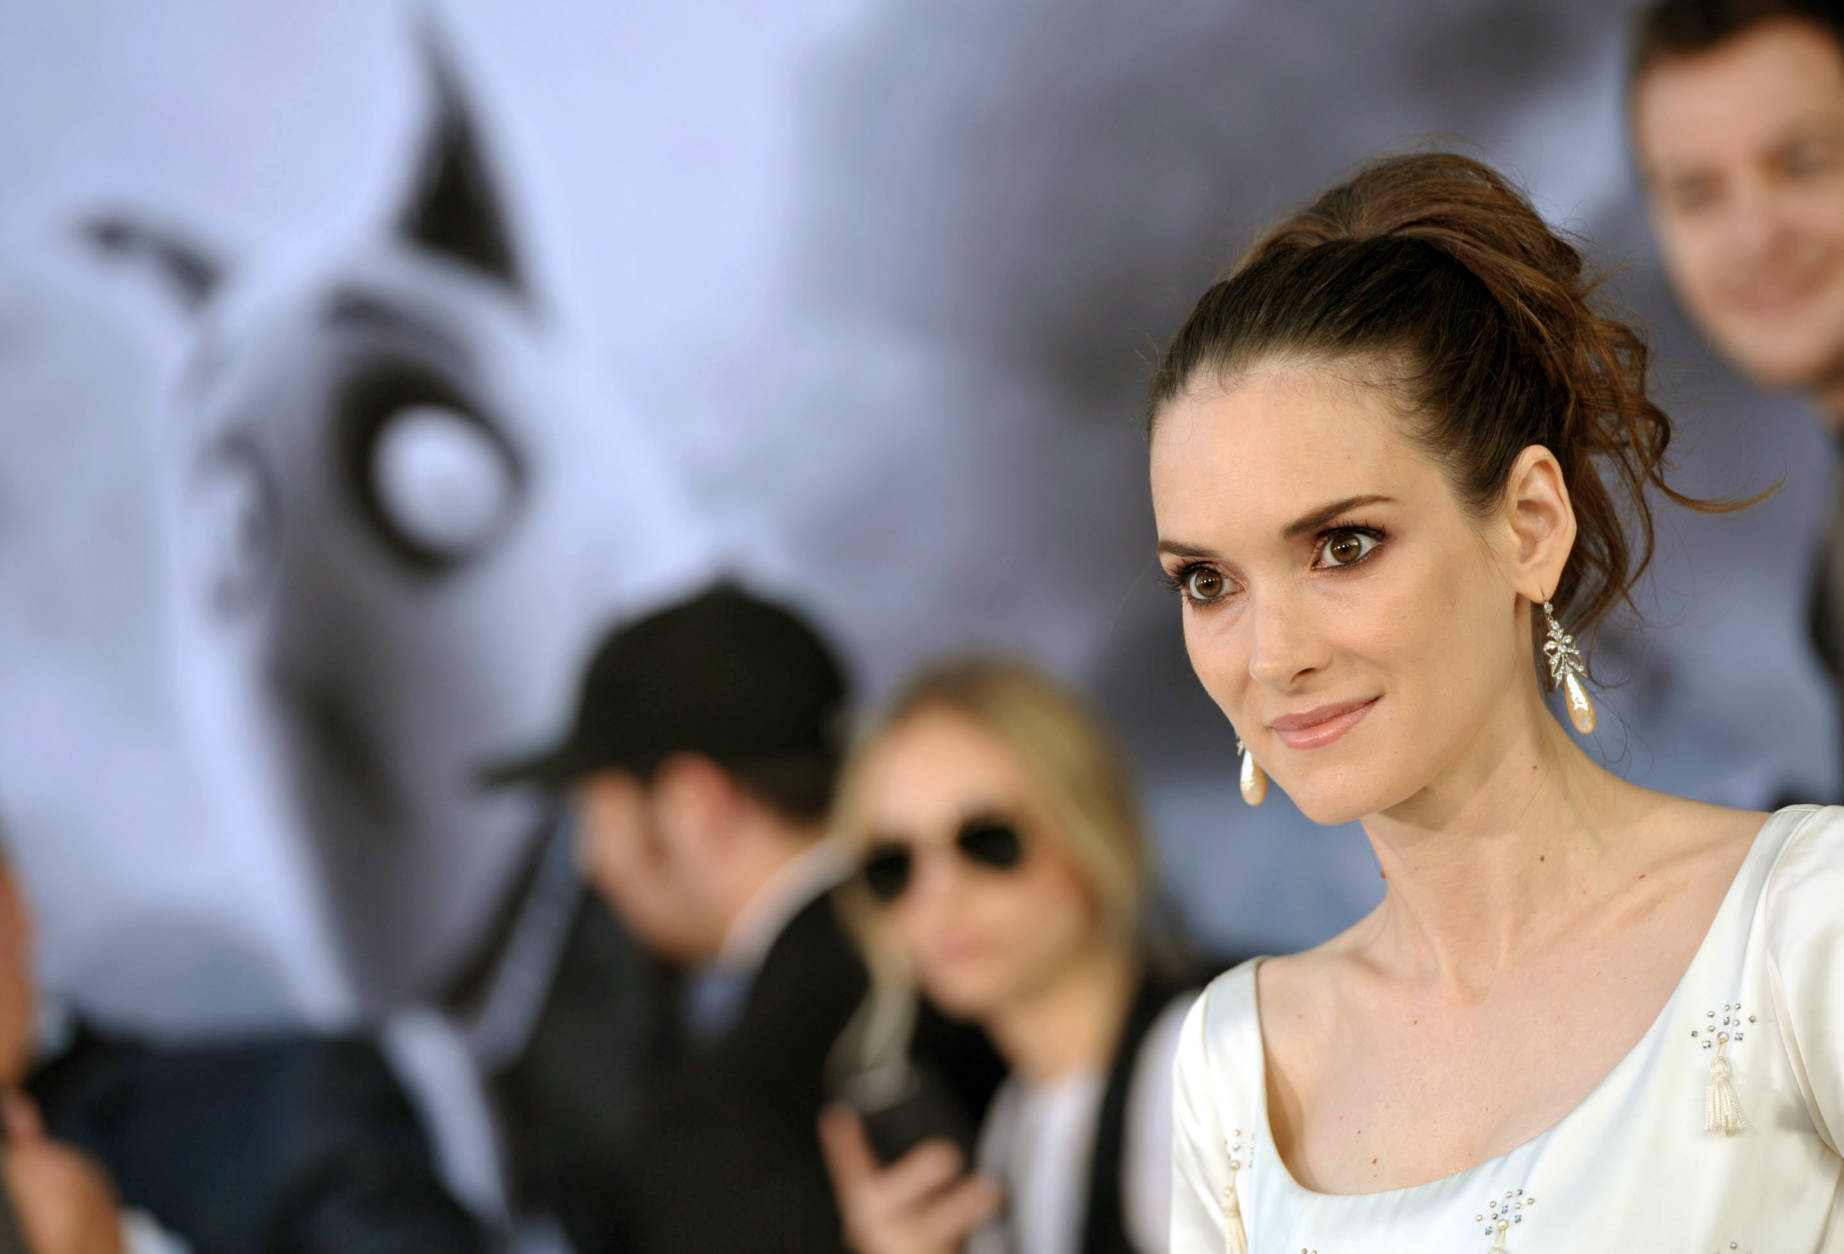 Actress Winona Ryder attends the LA premiere of "Frankenweenie" at the El Capitan Theatre on Monday, Sept. 24, 2012, in Los Angeles. "Frankenweenie" is a stop-motion animated film, filmed in black and white and rendered in 3D. (Photo by John Shearer/Invision/AP)